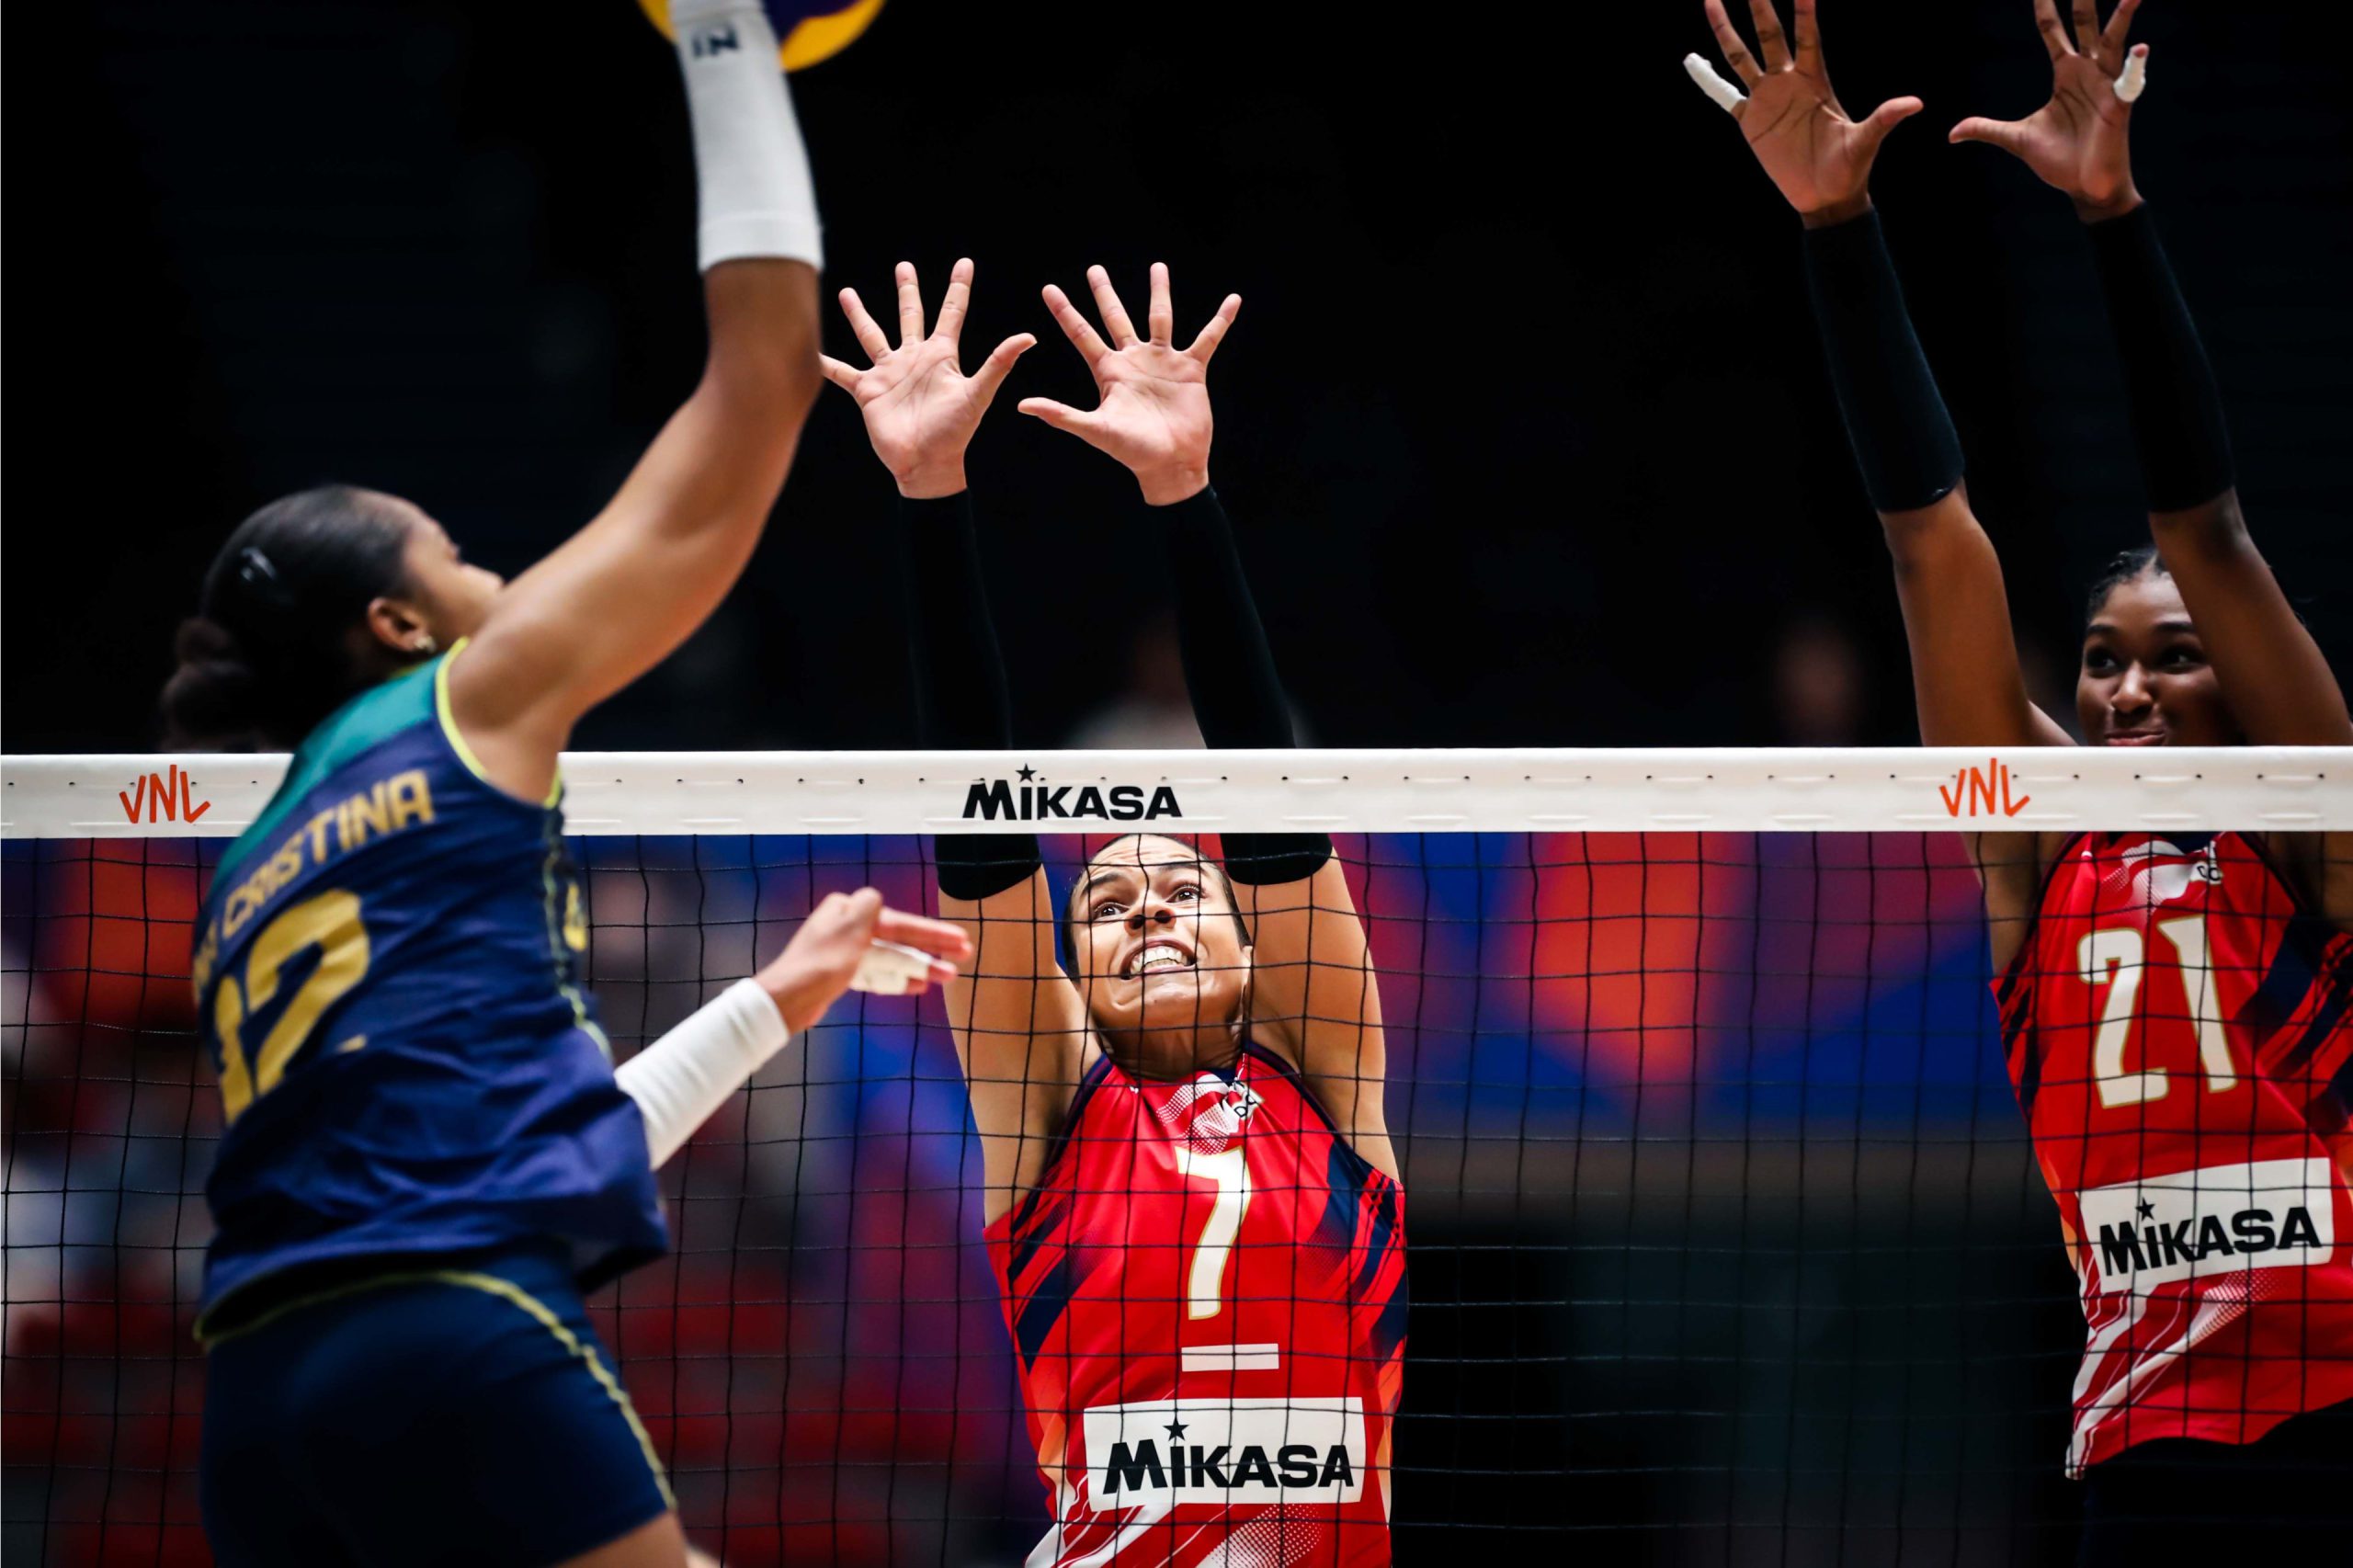 Dominican Republic put up a tough fight, but lose in four to Brazil